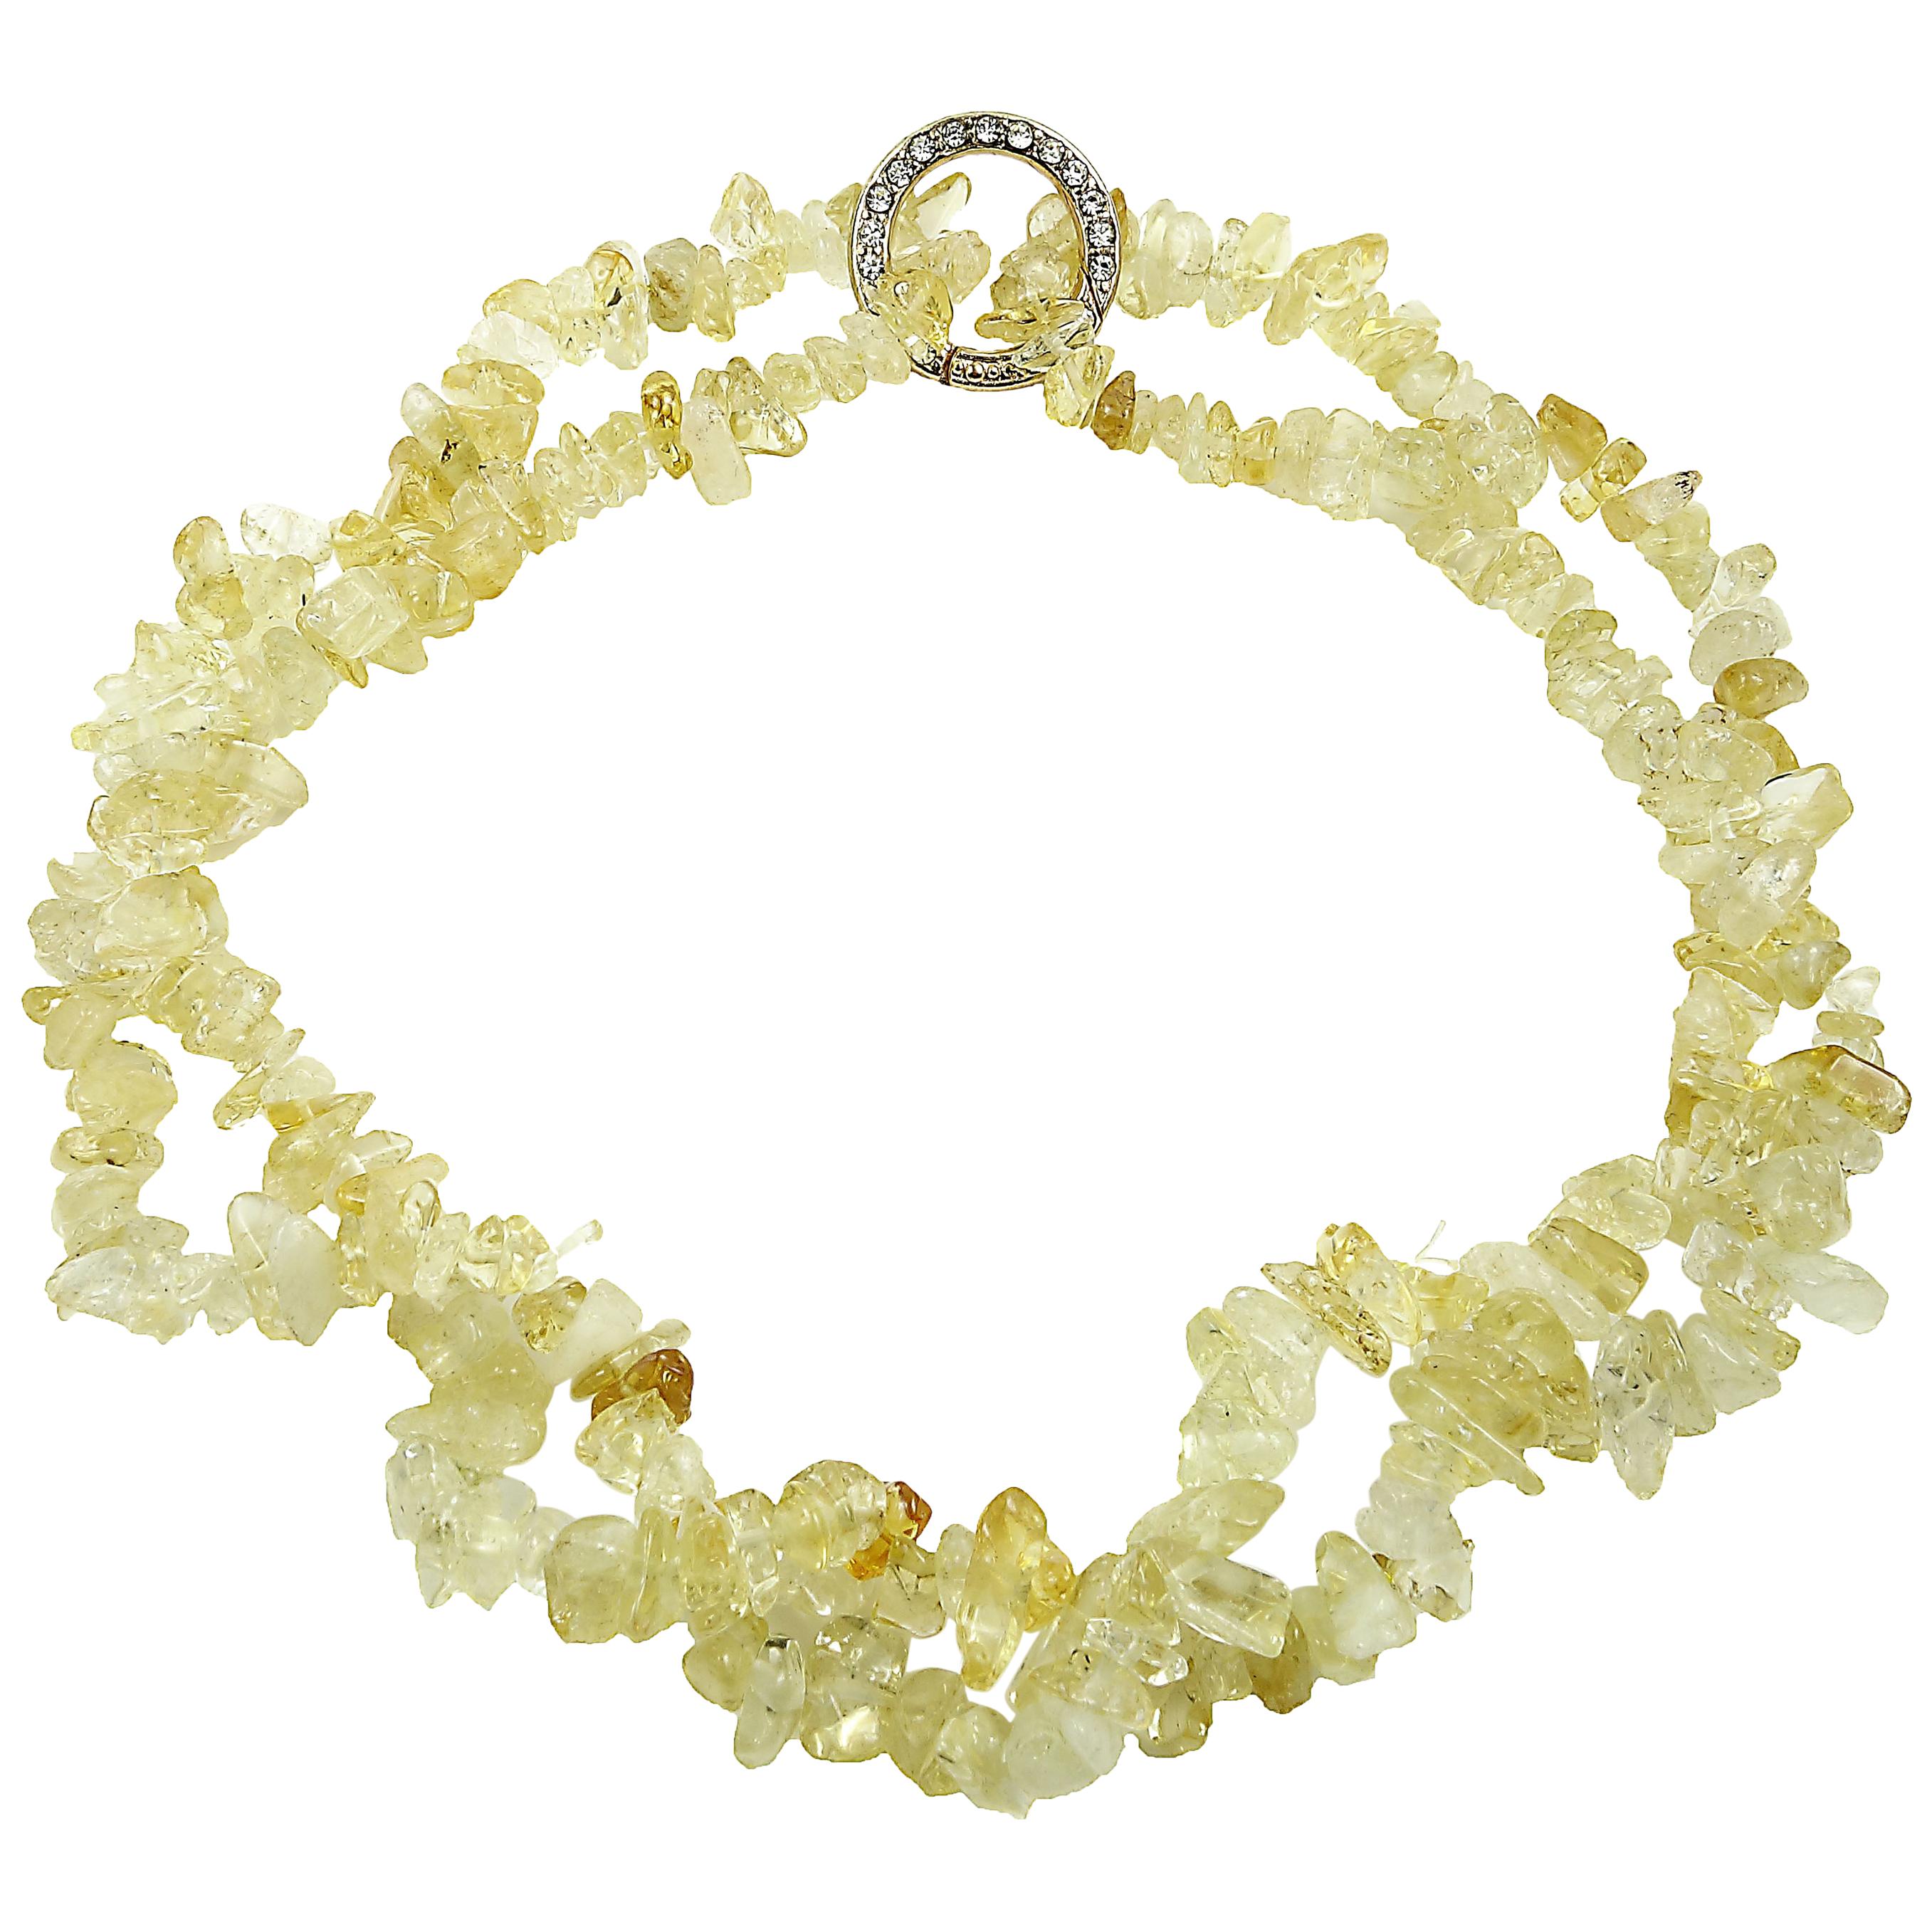 32 Inch Infinity necklace of highly polished Citrine chips  with sparkly clasp.  Wear this gorgeous stand of Citrine long or doubled.  The lovely golden color enhances your entire wardrobe. In ancient times people carried Citrine as a protection